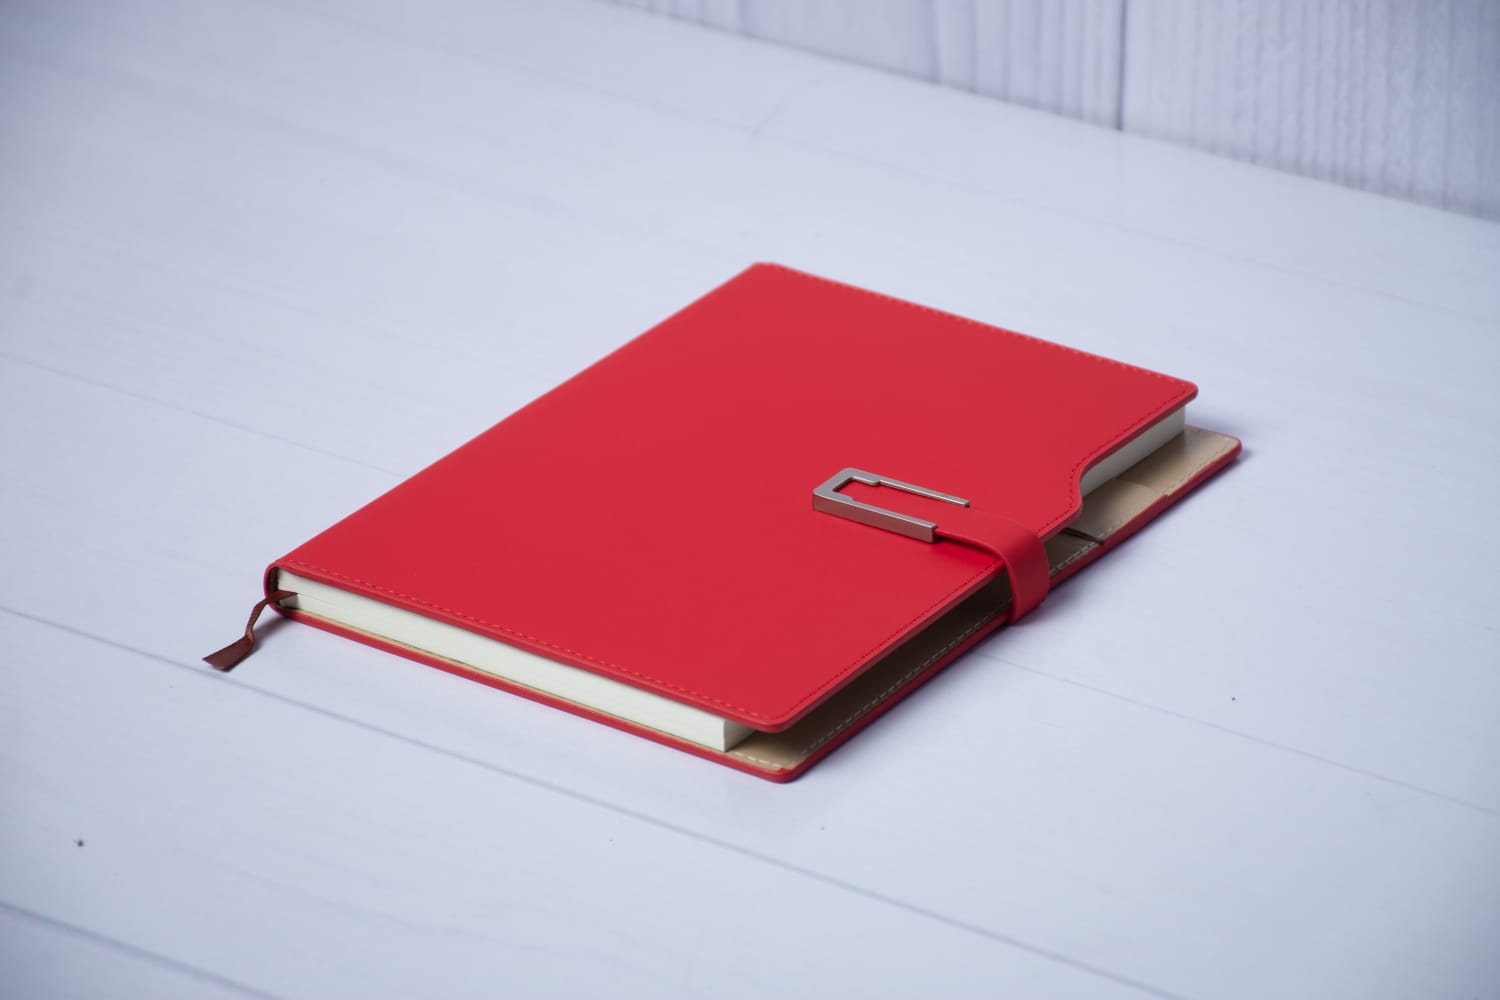 Deluxe A5 Notebook